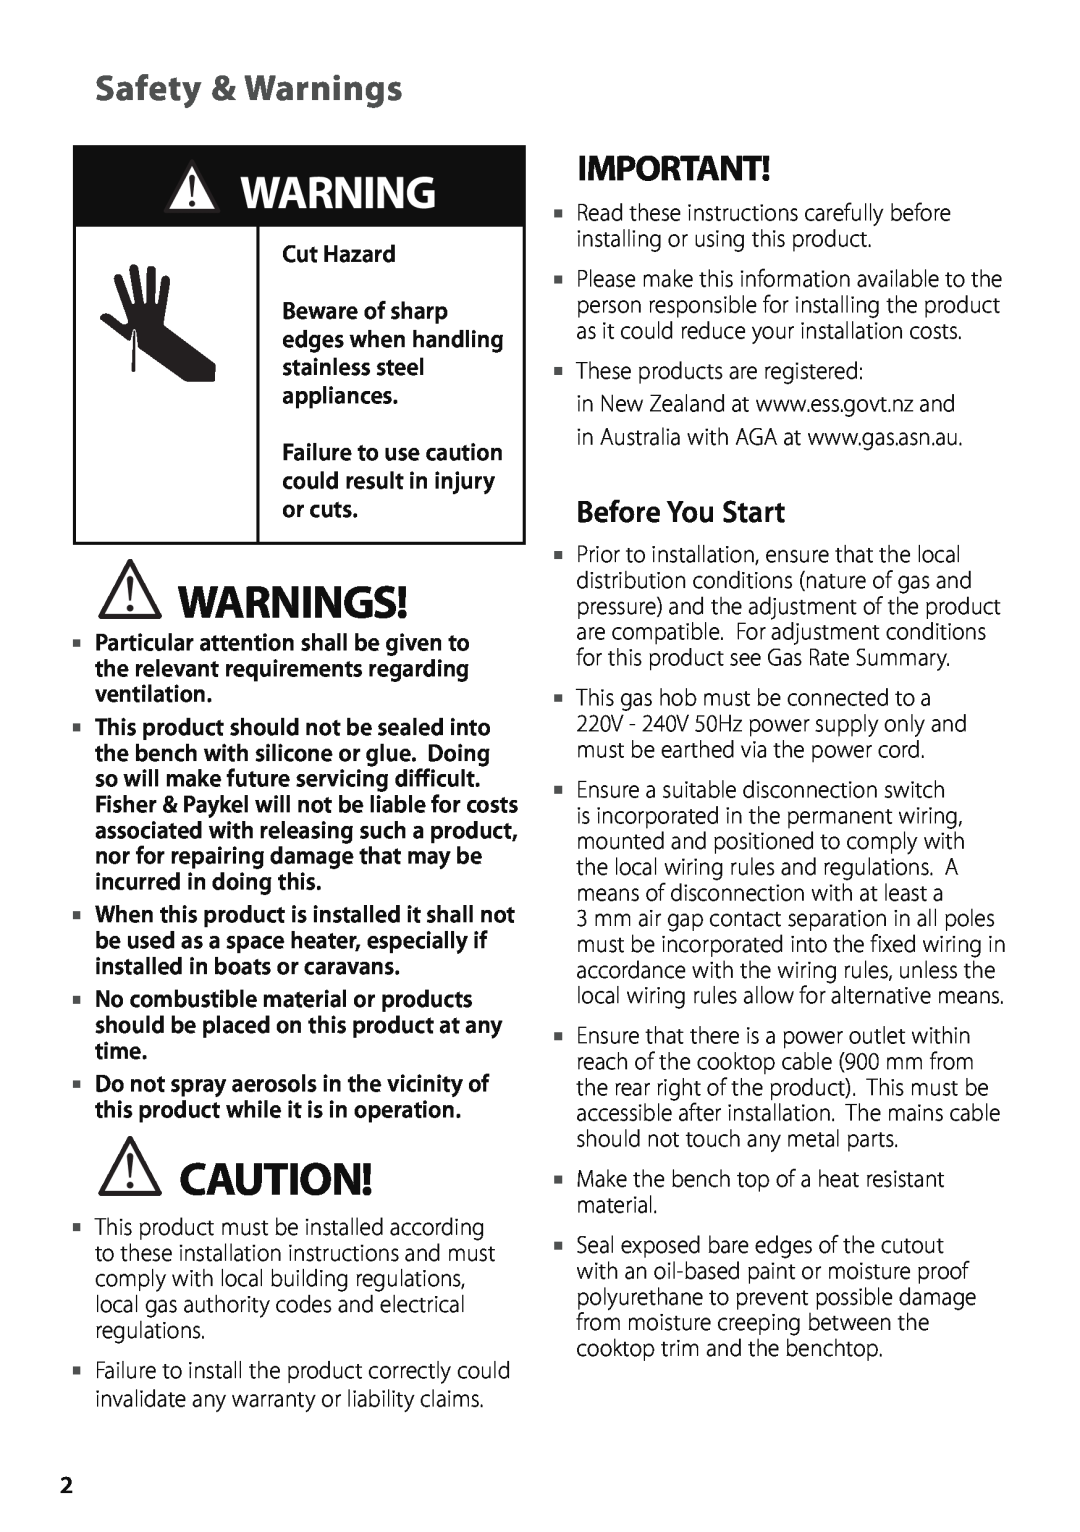 Fisher & Paykel CG603 installation instructions Safety & Warnings, Before You Start, Cut Hazard 